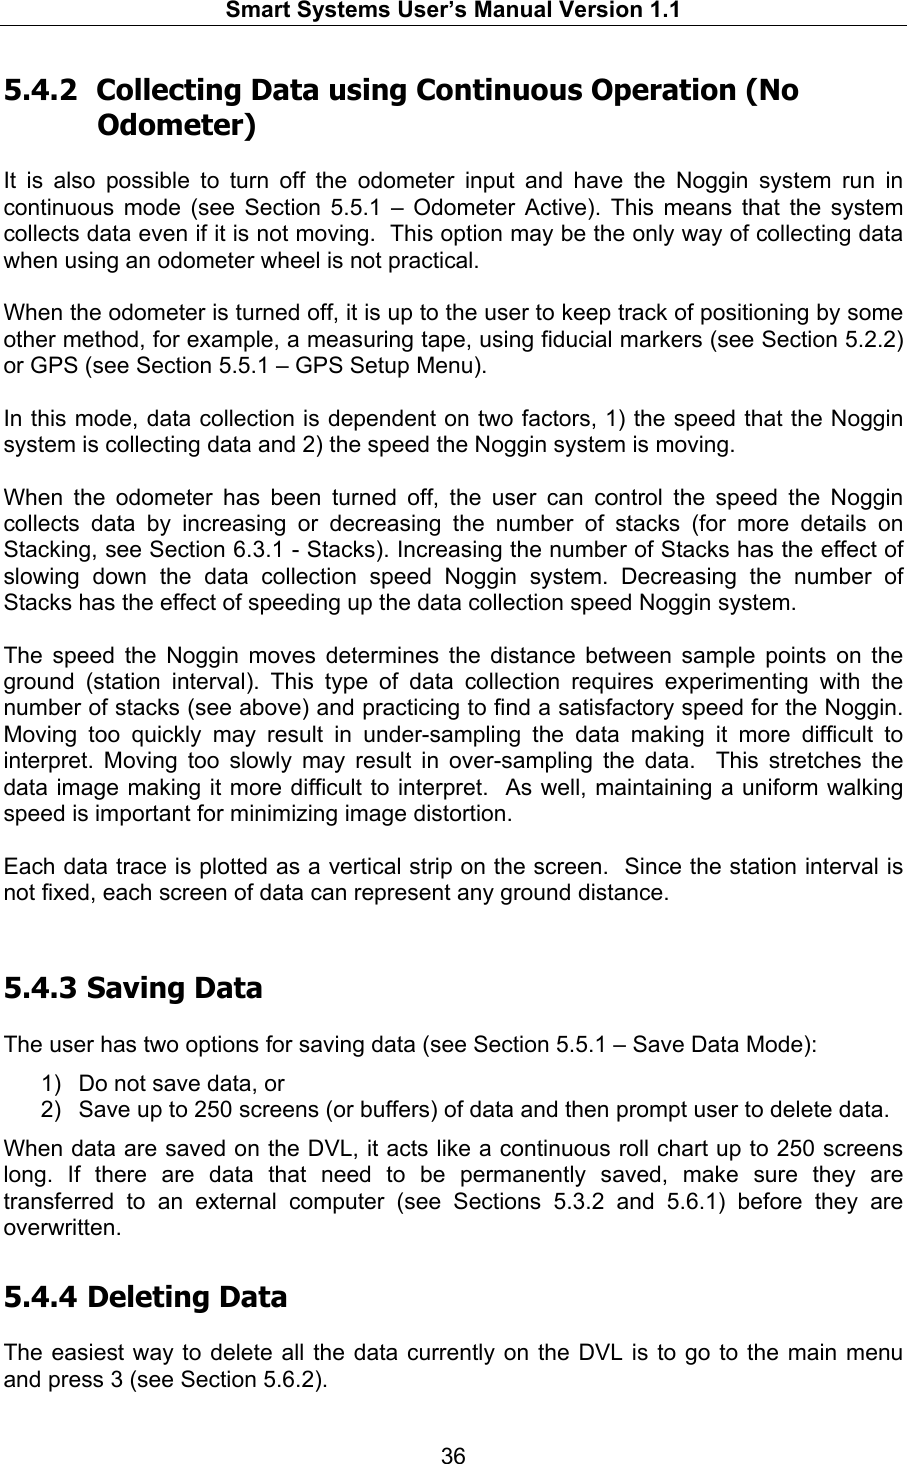   Smart Systems User’s Manual Version 1.1  36  5.4.2  Collecting Data using Continuous Operation (No Odometer)  It is also possible to turn off the odometer input and have the Noggin system run in continuous mode (see Section 5.5.1 – Odometer Active). This means that the system collects data even if it is not moving.  This option may be the only way of collecting data when using an odometer wheel is not practical.  When the odometer is turned off, it is up to the user to keep track of positioning by some other method, for example, a measuring tape, using fiducial markers (see Section 5.2.2) or GPS (see Section 5.5.1 – GPS Setup Menu).  In this mode, data collection is dependent on two factors, 1) the speed that the Noggin system is collecting data and 2) the speed the Noggin system is moving.  When the odometer has been turned off, the user can control the speed the Noggin collects data by increasing or decreasing the number of stacks (for more details on Stacking, see Section 6.3.1 - Stacks). Increasing the number of Stacks has the effect of slowing down the data collection speed Noggin system. Decreasing the number of Stacks has the effect of speeding up the data collection speed Noggin system.  The speed the Noggin moves determines the distance between sample points on the ground (station interval). This type of data collection requires experimenting with the number of stacks (see above) and practicing to find a satisfactory speed for the Noggin. Moving too quickly may result in under-sampling the data making it more difficult to interpret. Moving too slowly may result in over-sampling the data.  This stretches the data image making it more difficult to interpret.  As well, maintaining a uniform walking speed is important for minimizing image distortion.  Each data trace is plotted as a vertical strip on the screen.  Since the station interval is not fixed, each screen of data can represent any ground distance.   5.4.3  Saving Data  The user has two options for saving data (see Section 5.5.1 – Save Data Mode):  1)  Do not save data, or  2)  Save up to 250 screens (or buffers) of data and then prompt user to delete data. When data are saved on the DVL, it acts like a continuous roll chart up to 250 screens long. If there are data that need to be permanently saved, make sure they are transferred to an external computer (see Sections 5.3.2 and 5.6.1) before they are overwritten.  5.4.4  Deleting Data  The easiest way to delete all the data currently on the DVL is to go to the main menu and press 3 (see Section 5.6.2).  